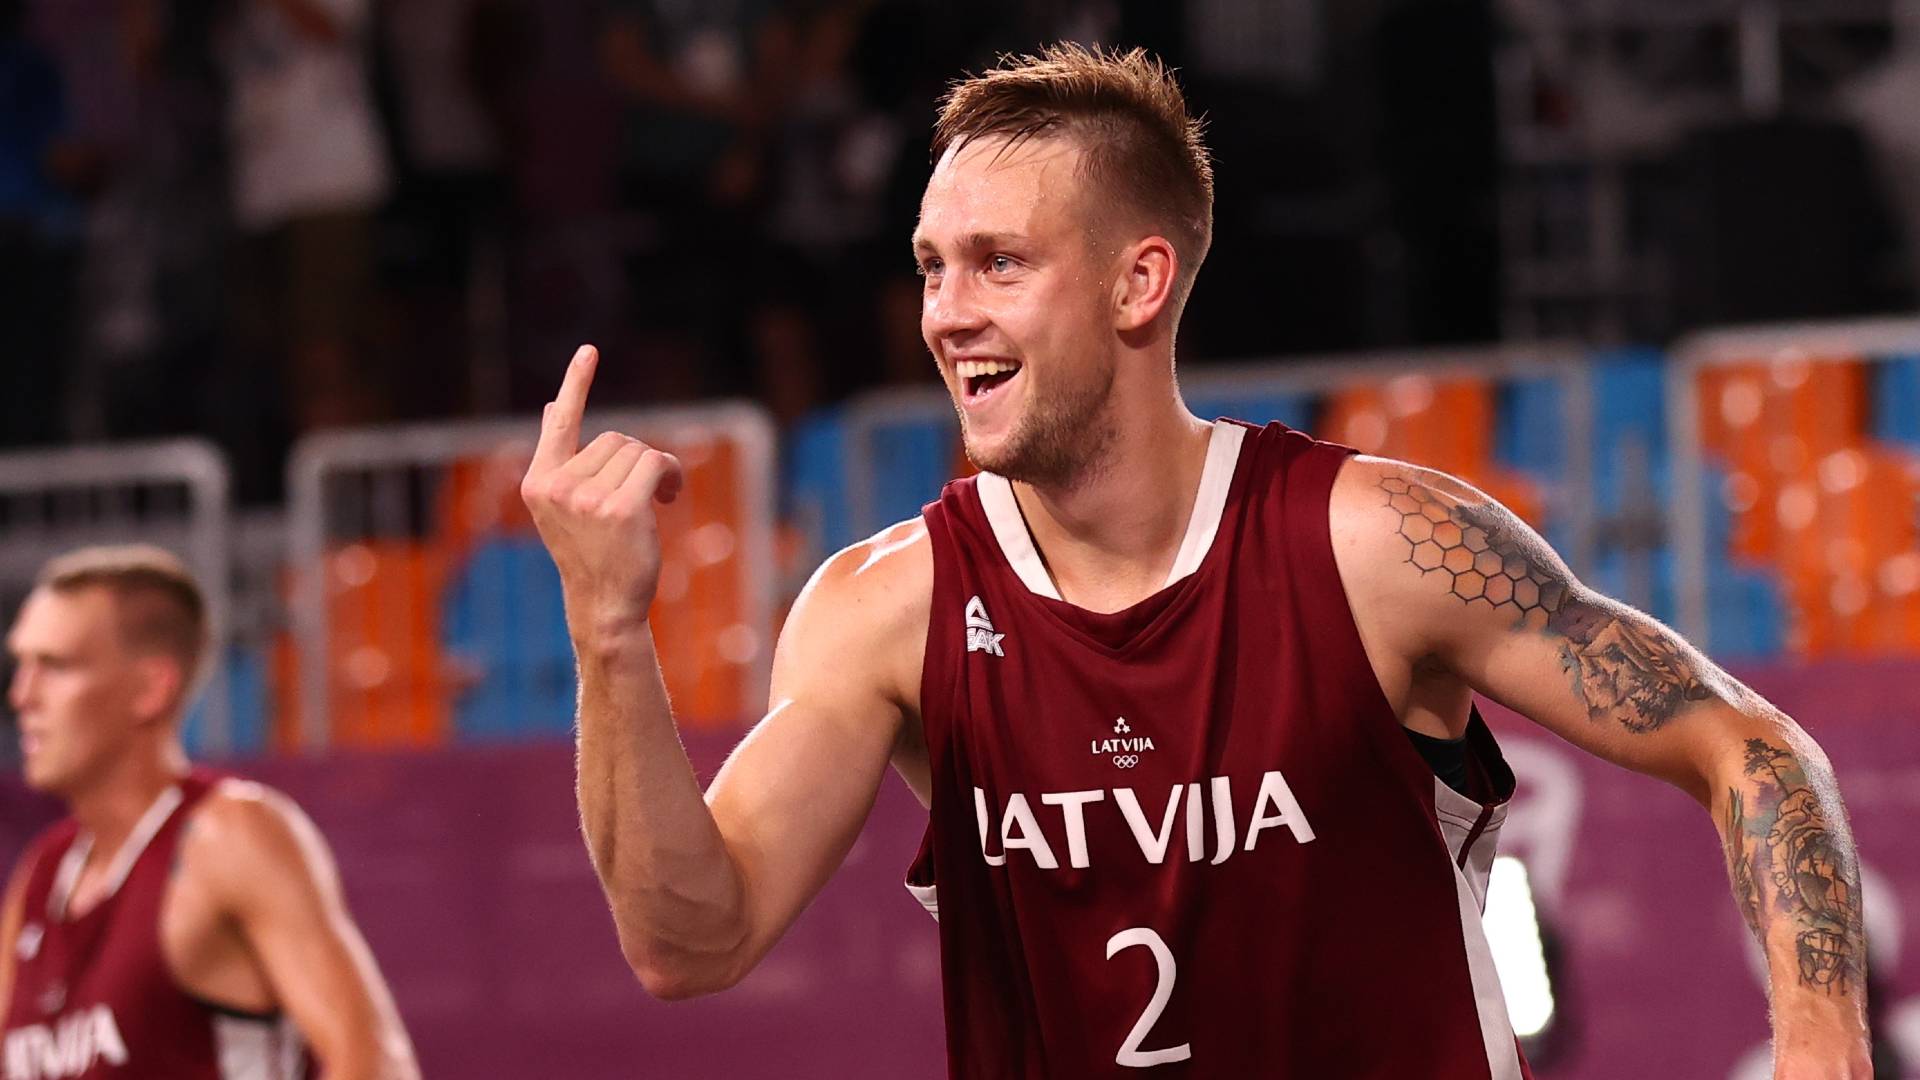 The FIBA European Cup 3x3 match between Latvia vs Montenegro will be held at Graz on Saturday, September 10 at 4:45 PM (International time), and September 10, 8:15 PM (Indian time).